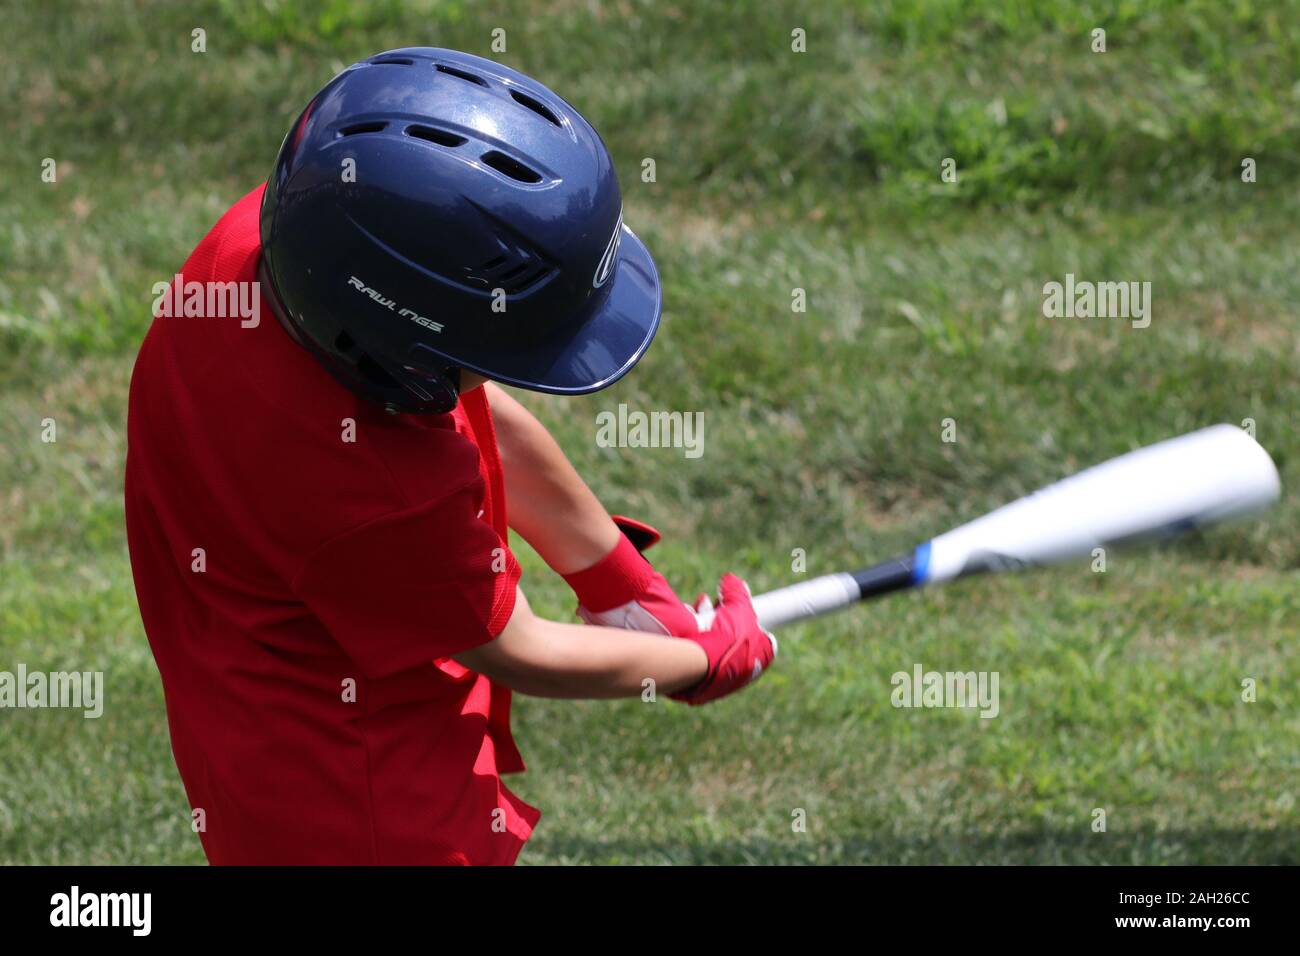 The young baseball player just hit the ball. Stock Photo